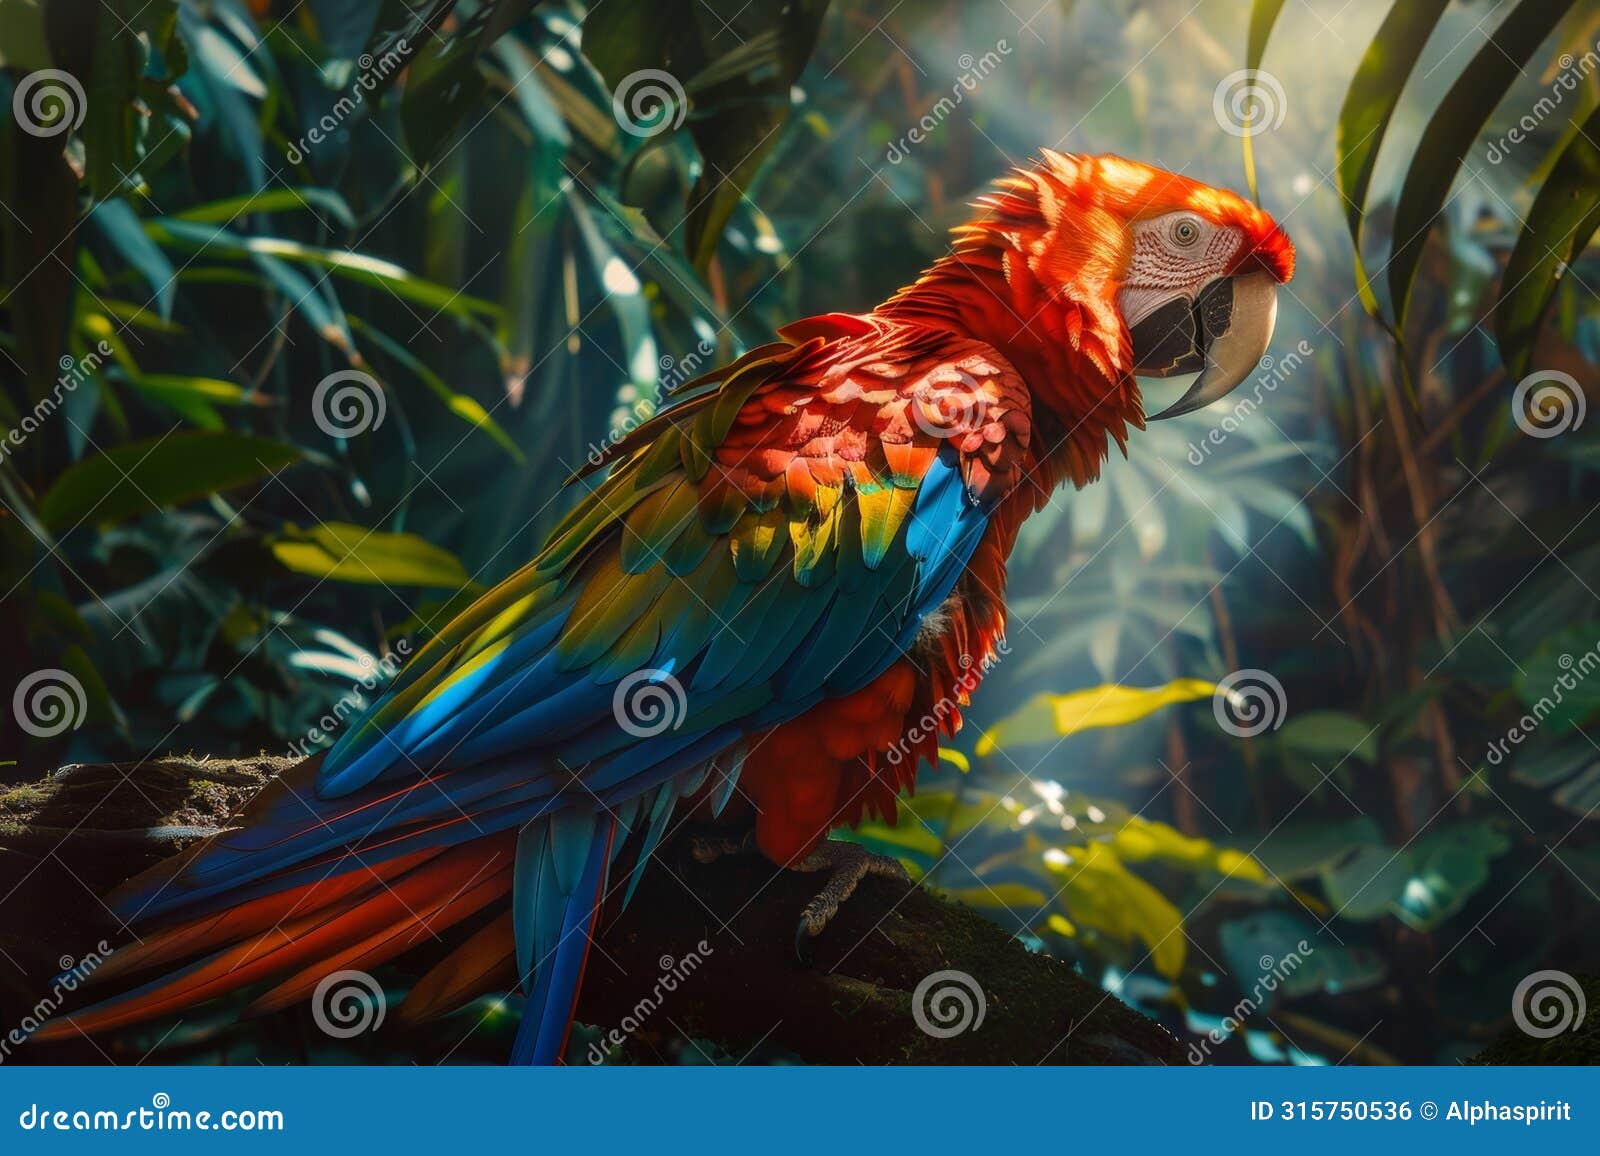 elegant macaw perched among vibrant tropical rainforest foliage with stunning colors